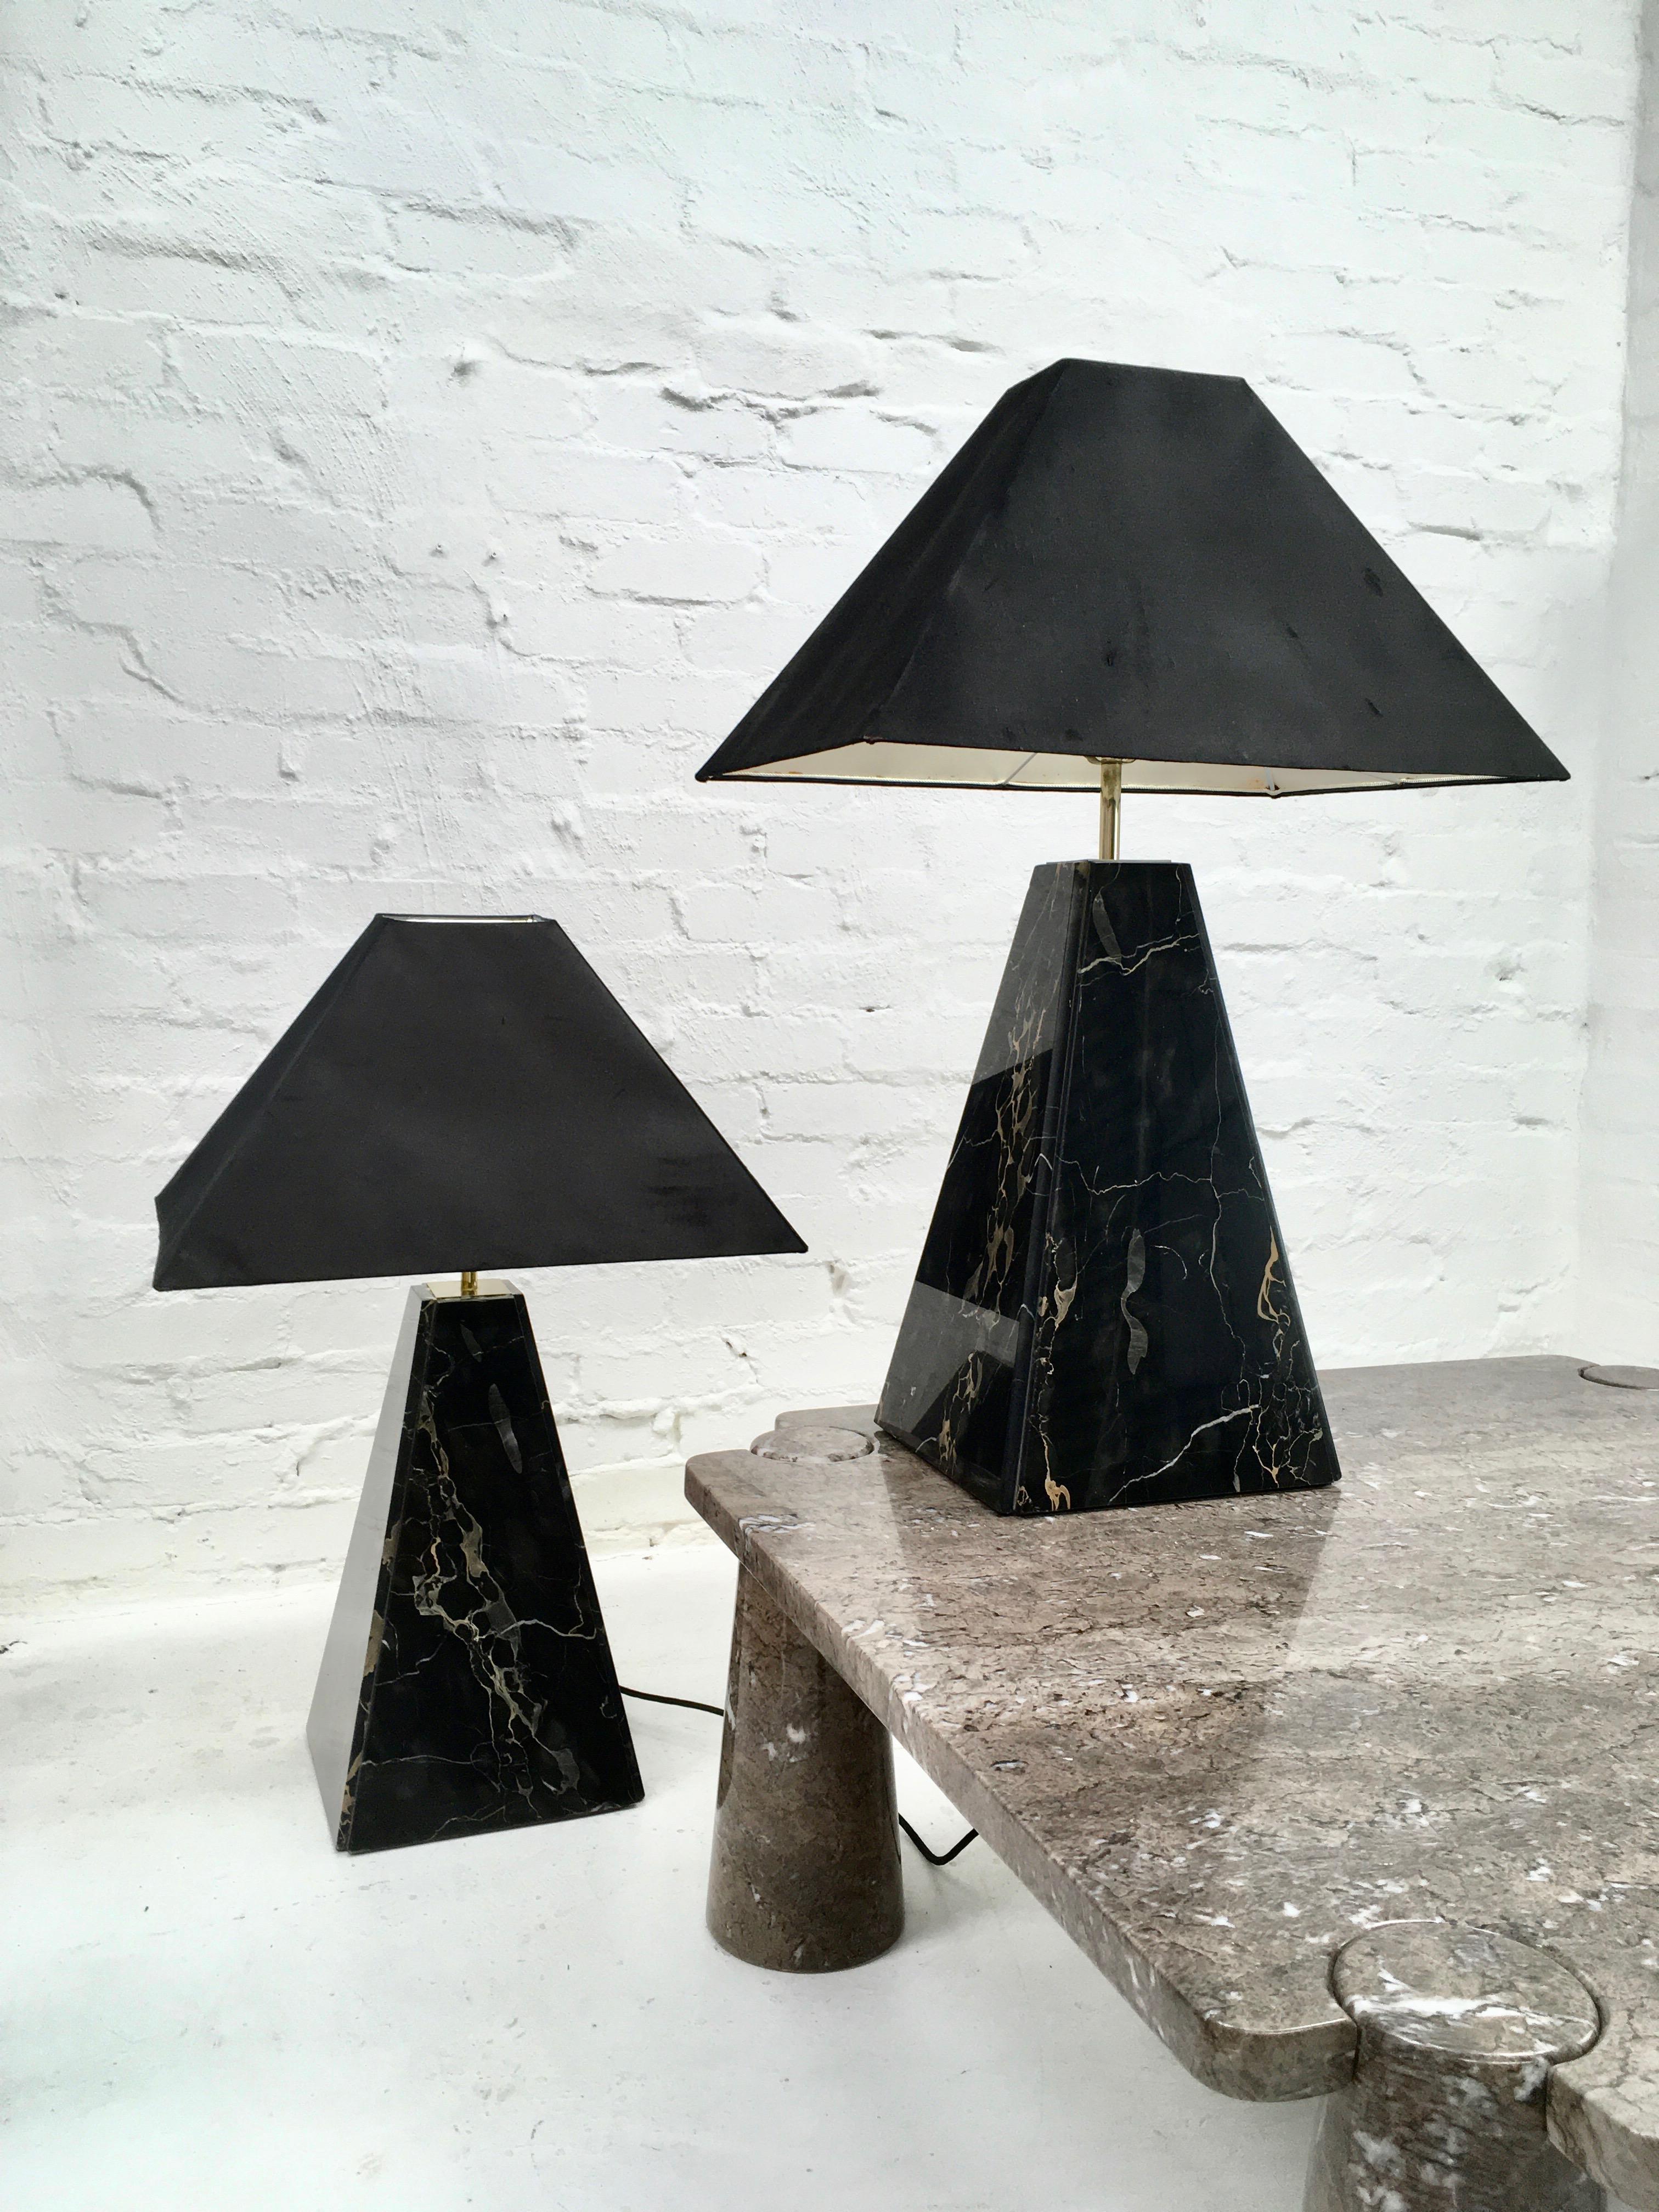 An exquisite, monumental pair of 1970s Cini Boeri for Arteluce 'Abat Jour' style black marble pyramid lamps, with original 1970s black silk cloth shades.

These have been rewired. They meet Australian/NZ standards, please see notes on wiring, below.